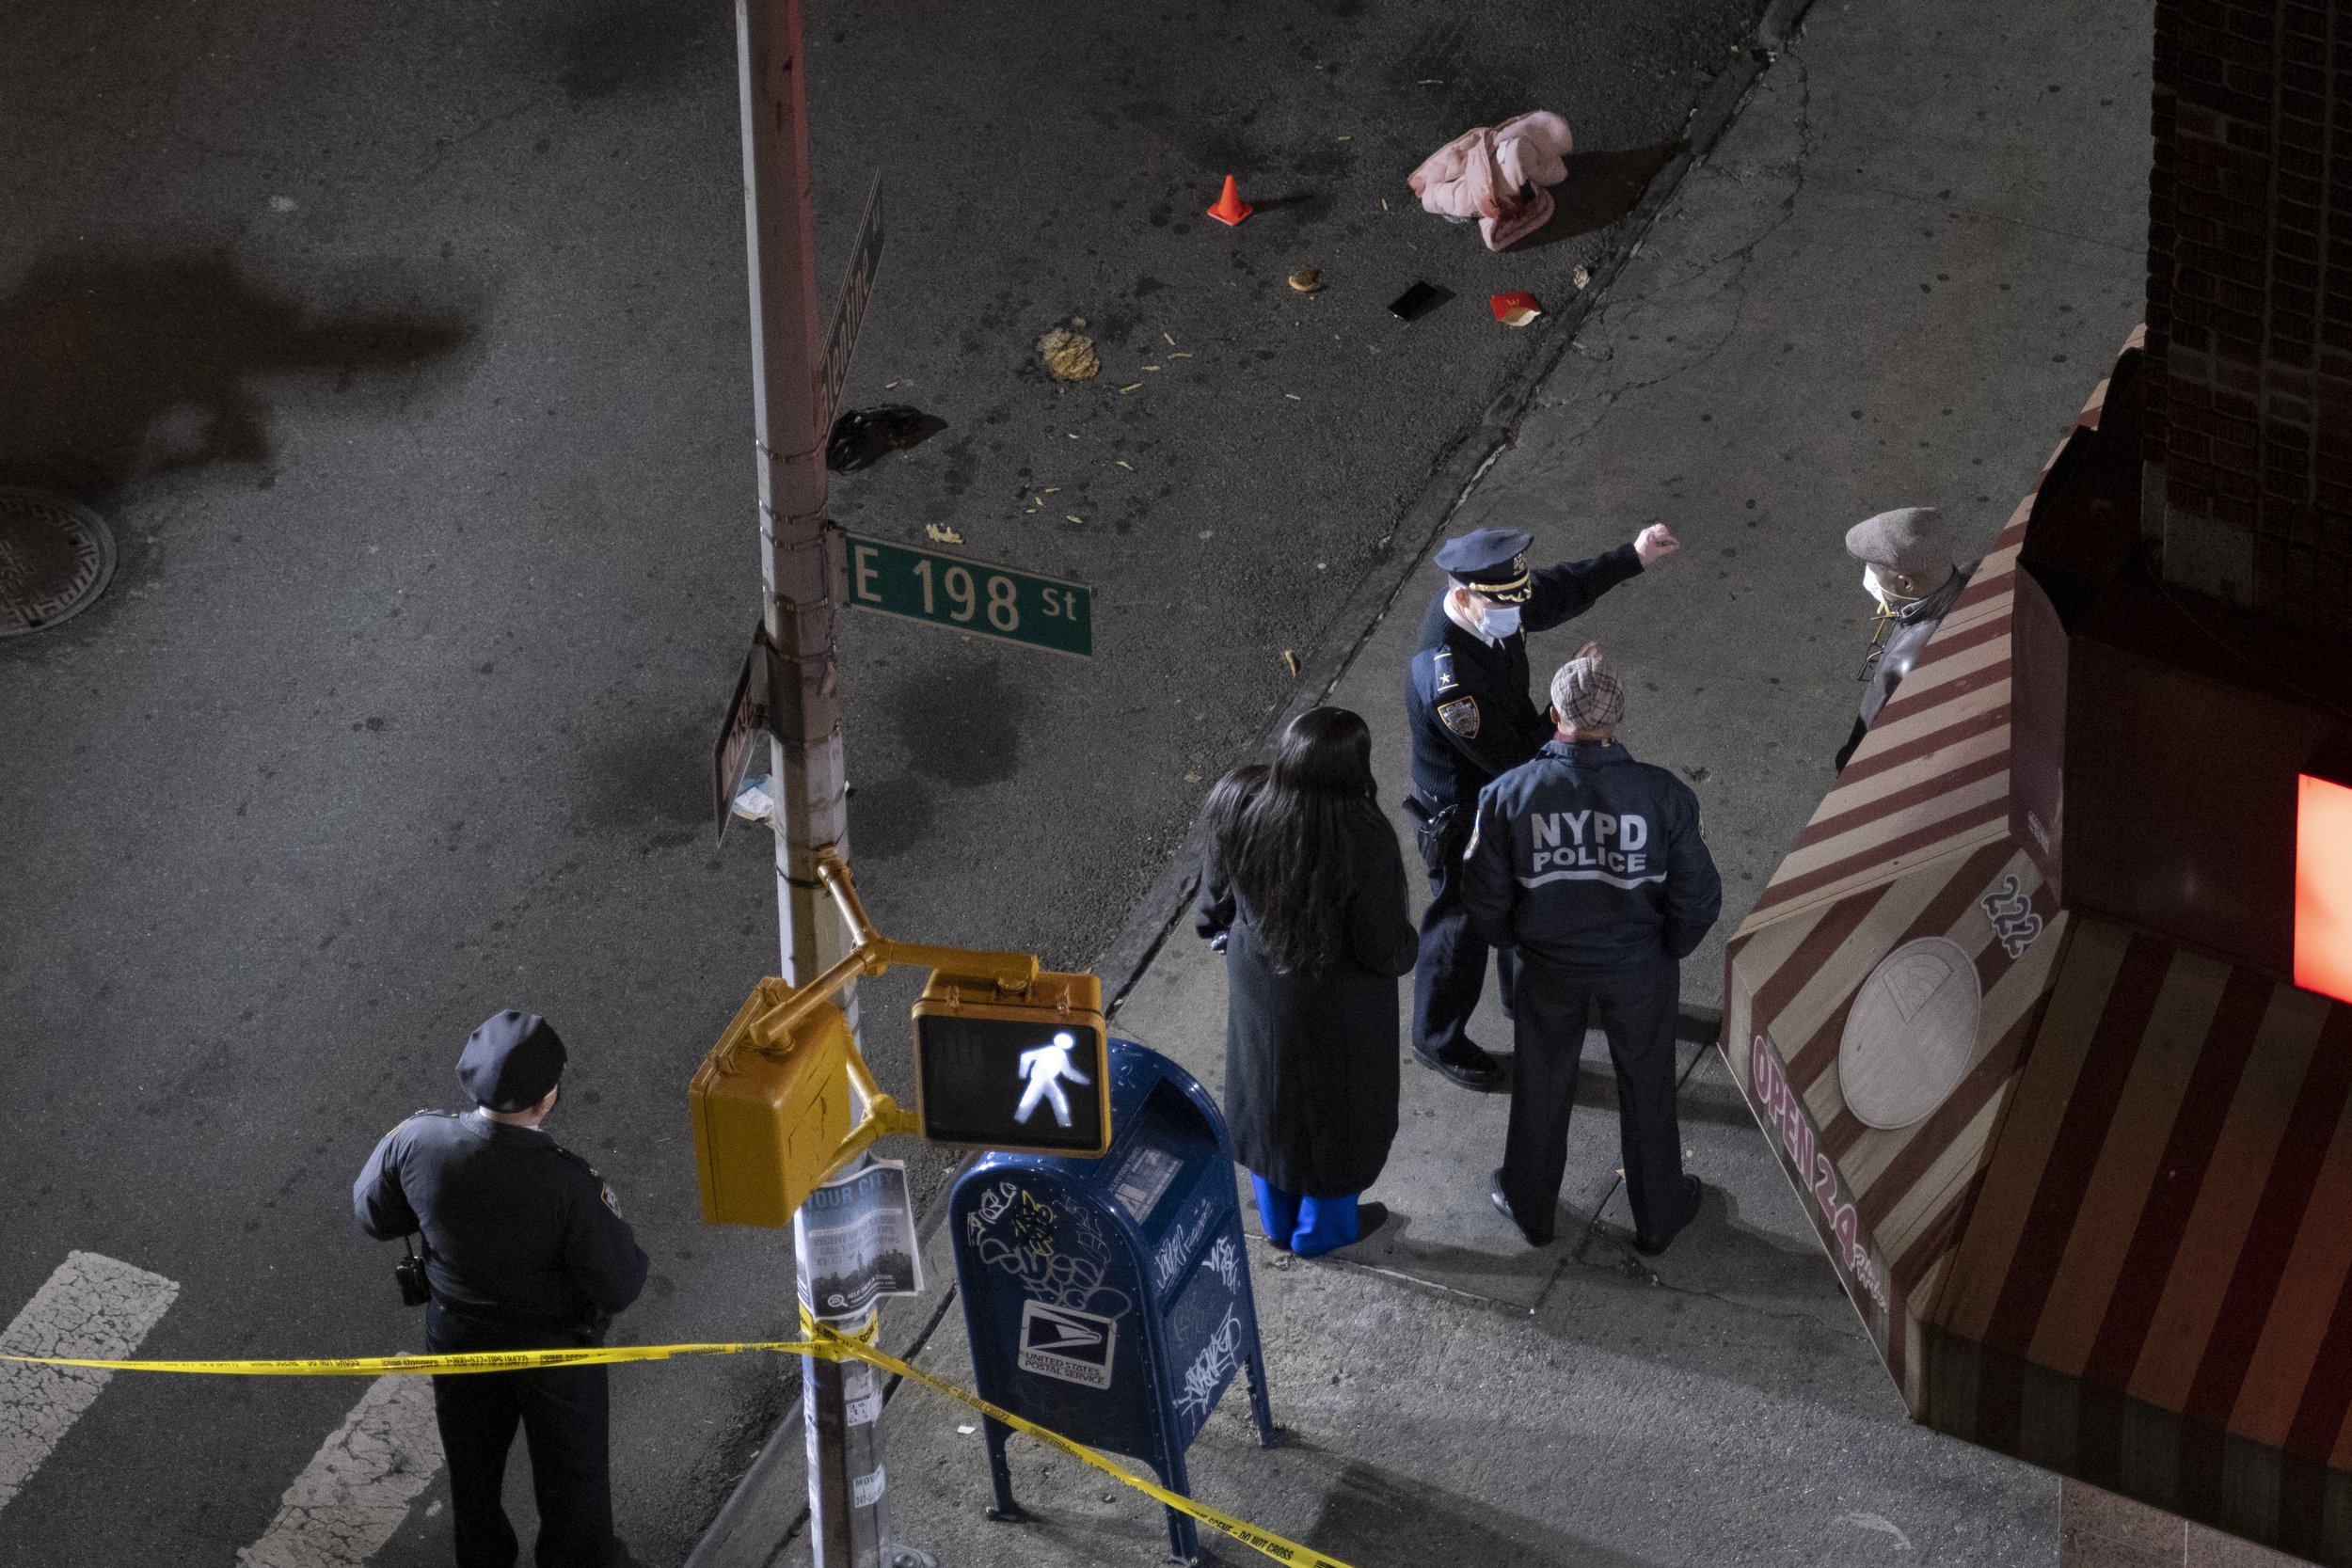  January 19th, 2022 - Bronx, NY: NYC Mayor Eric Adams and Bronx Borough President Vanessa Gibson being briefed by the NYPD near a bloodied child’s jacket at the scene of a shooting that left an 11-month-old baby girl in critical condition when a bull